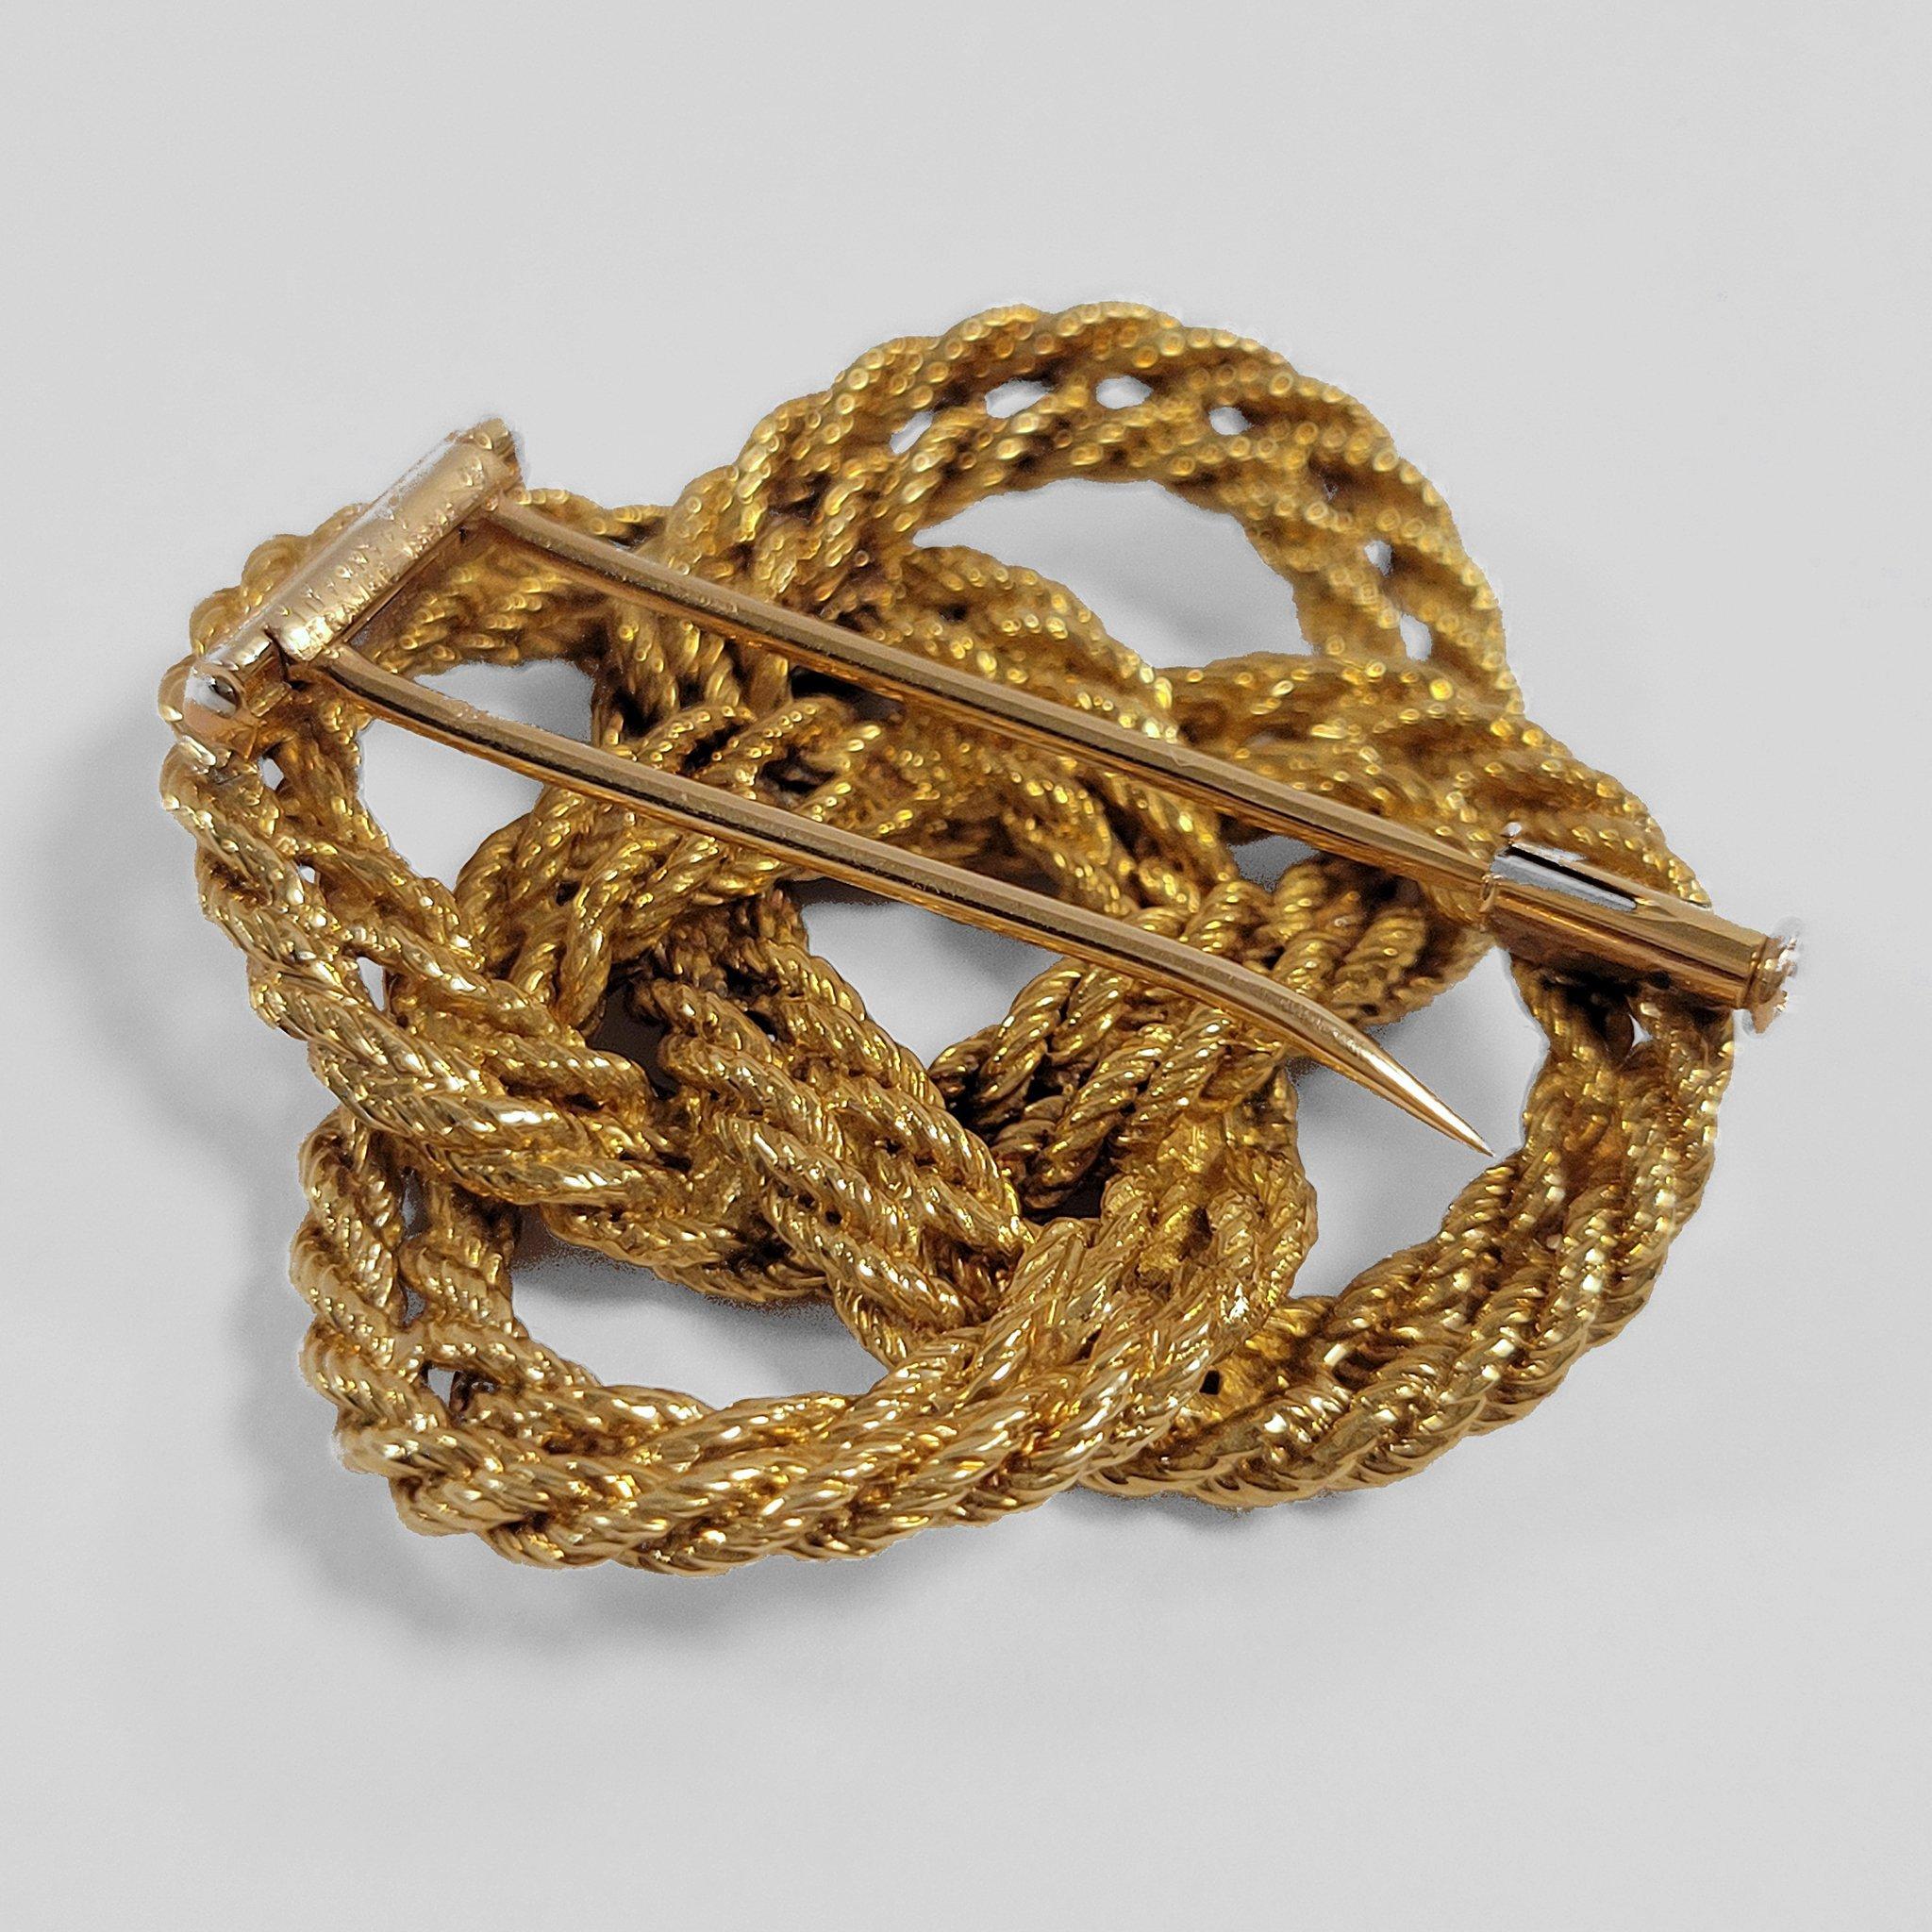 Made in the 1960s, this gold knot brooch was created by Tiffany & Co. Composed of  a double strand of gold rope twist, the brooch is designed as a square knot motif of eight crossings. A classic Tiffany & Co. form of the 1960s, this classic bold